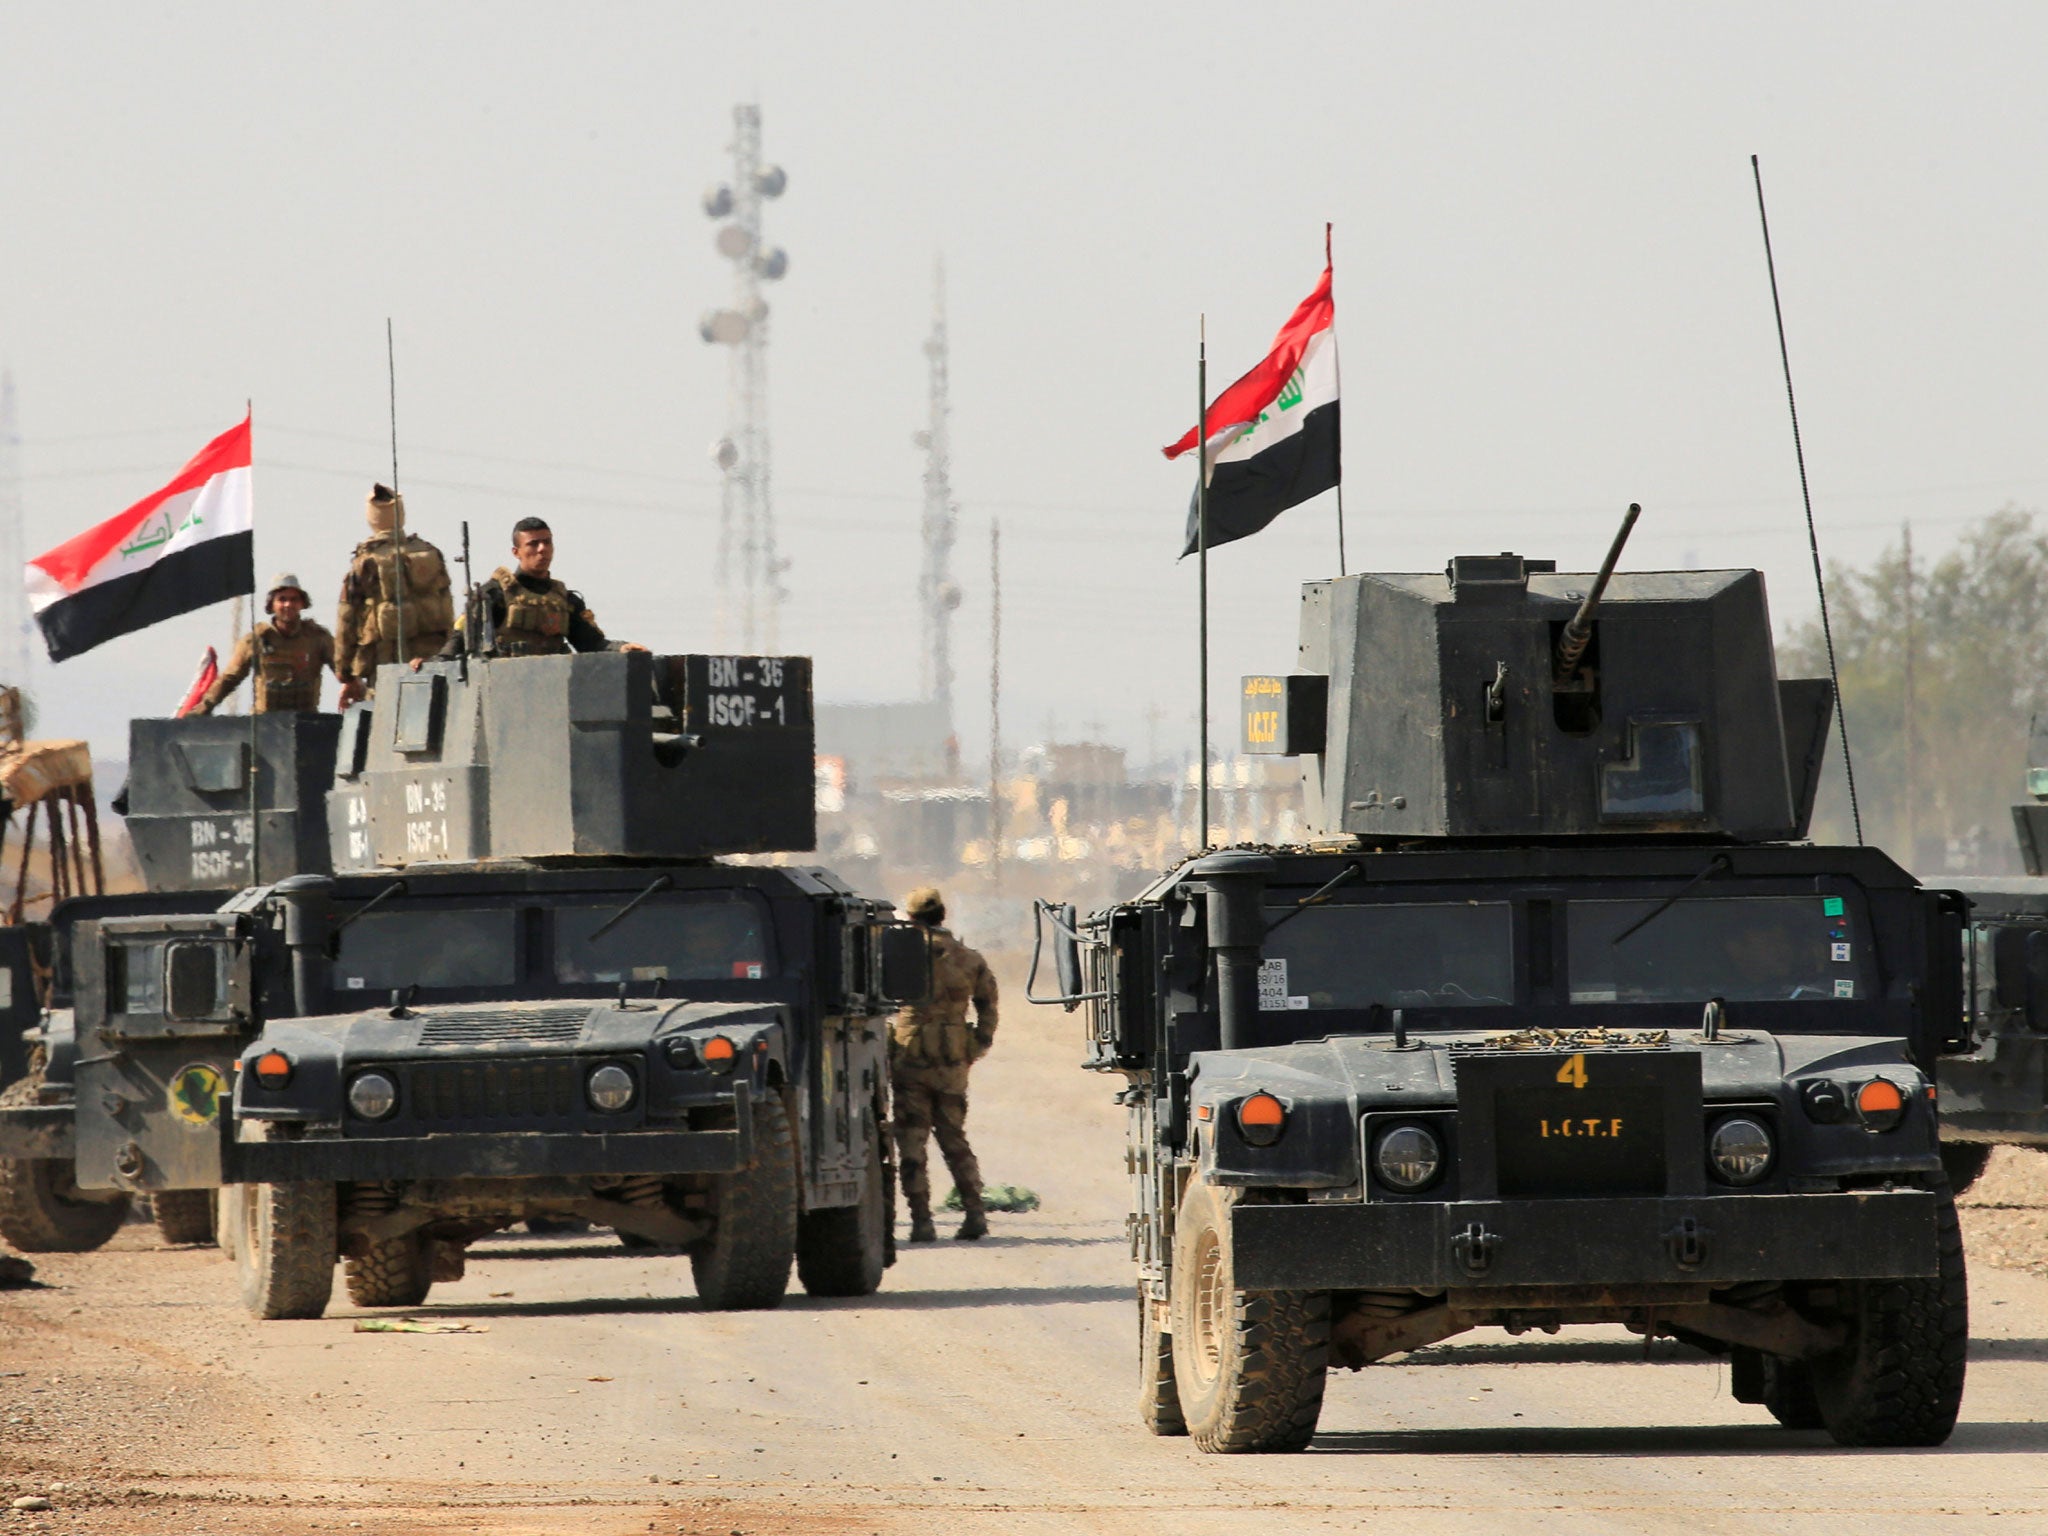 Iraqi Special Forces delayed their advance into east Mosul on Wednesday because high humidity and clouds made targeting from the air difficult